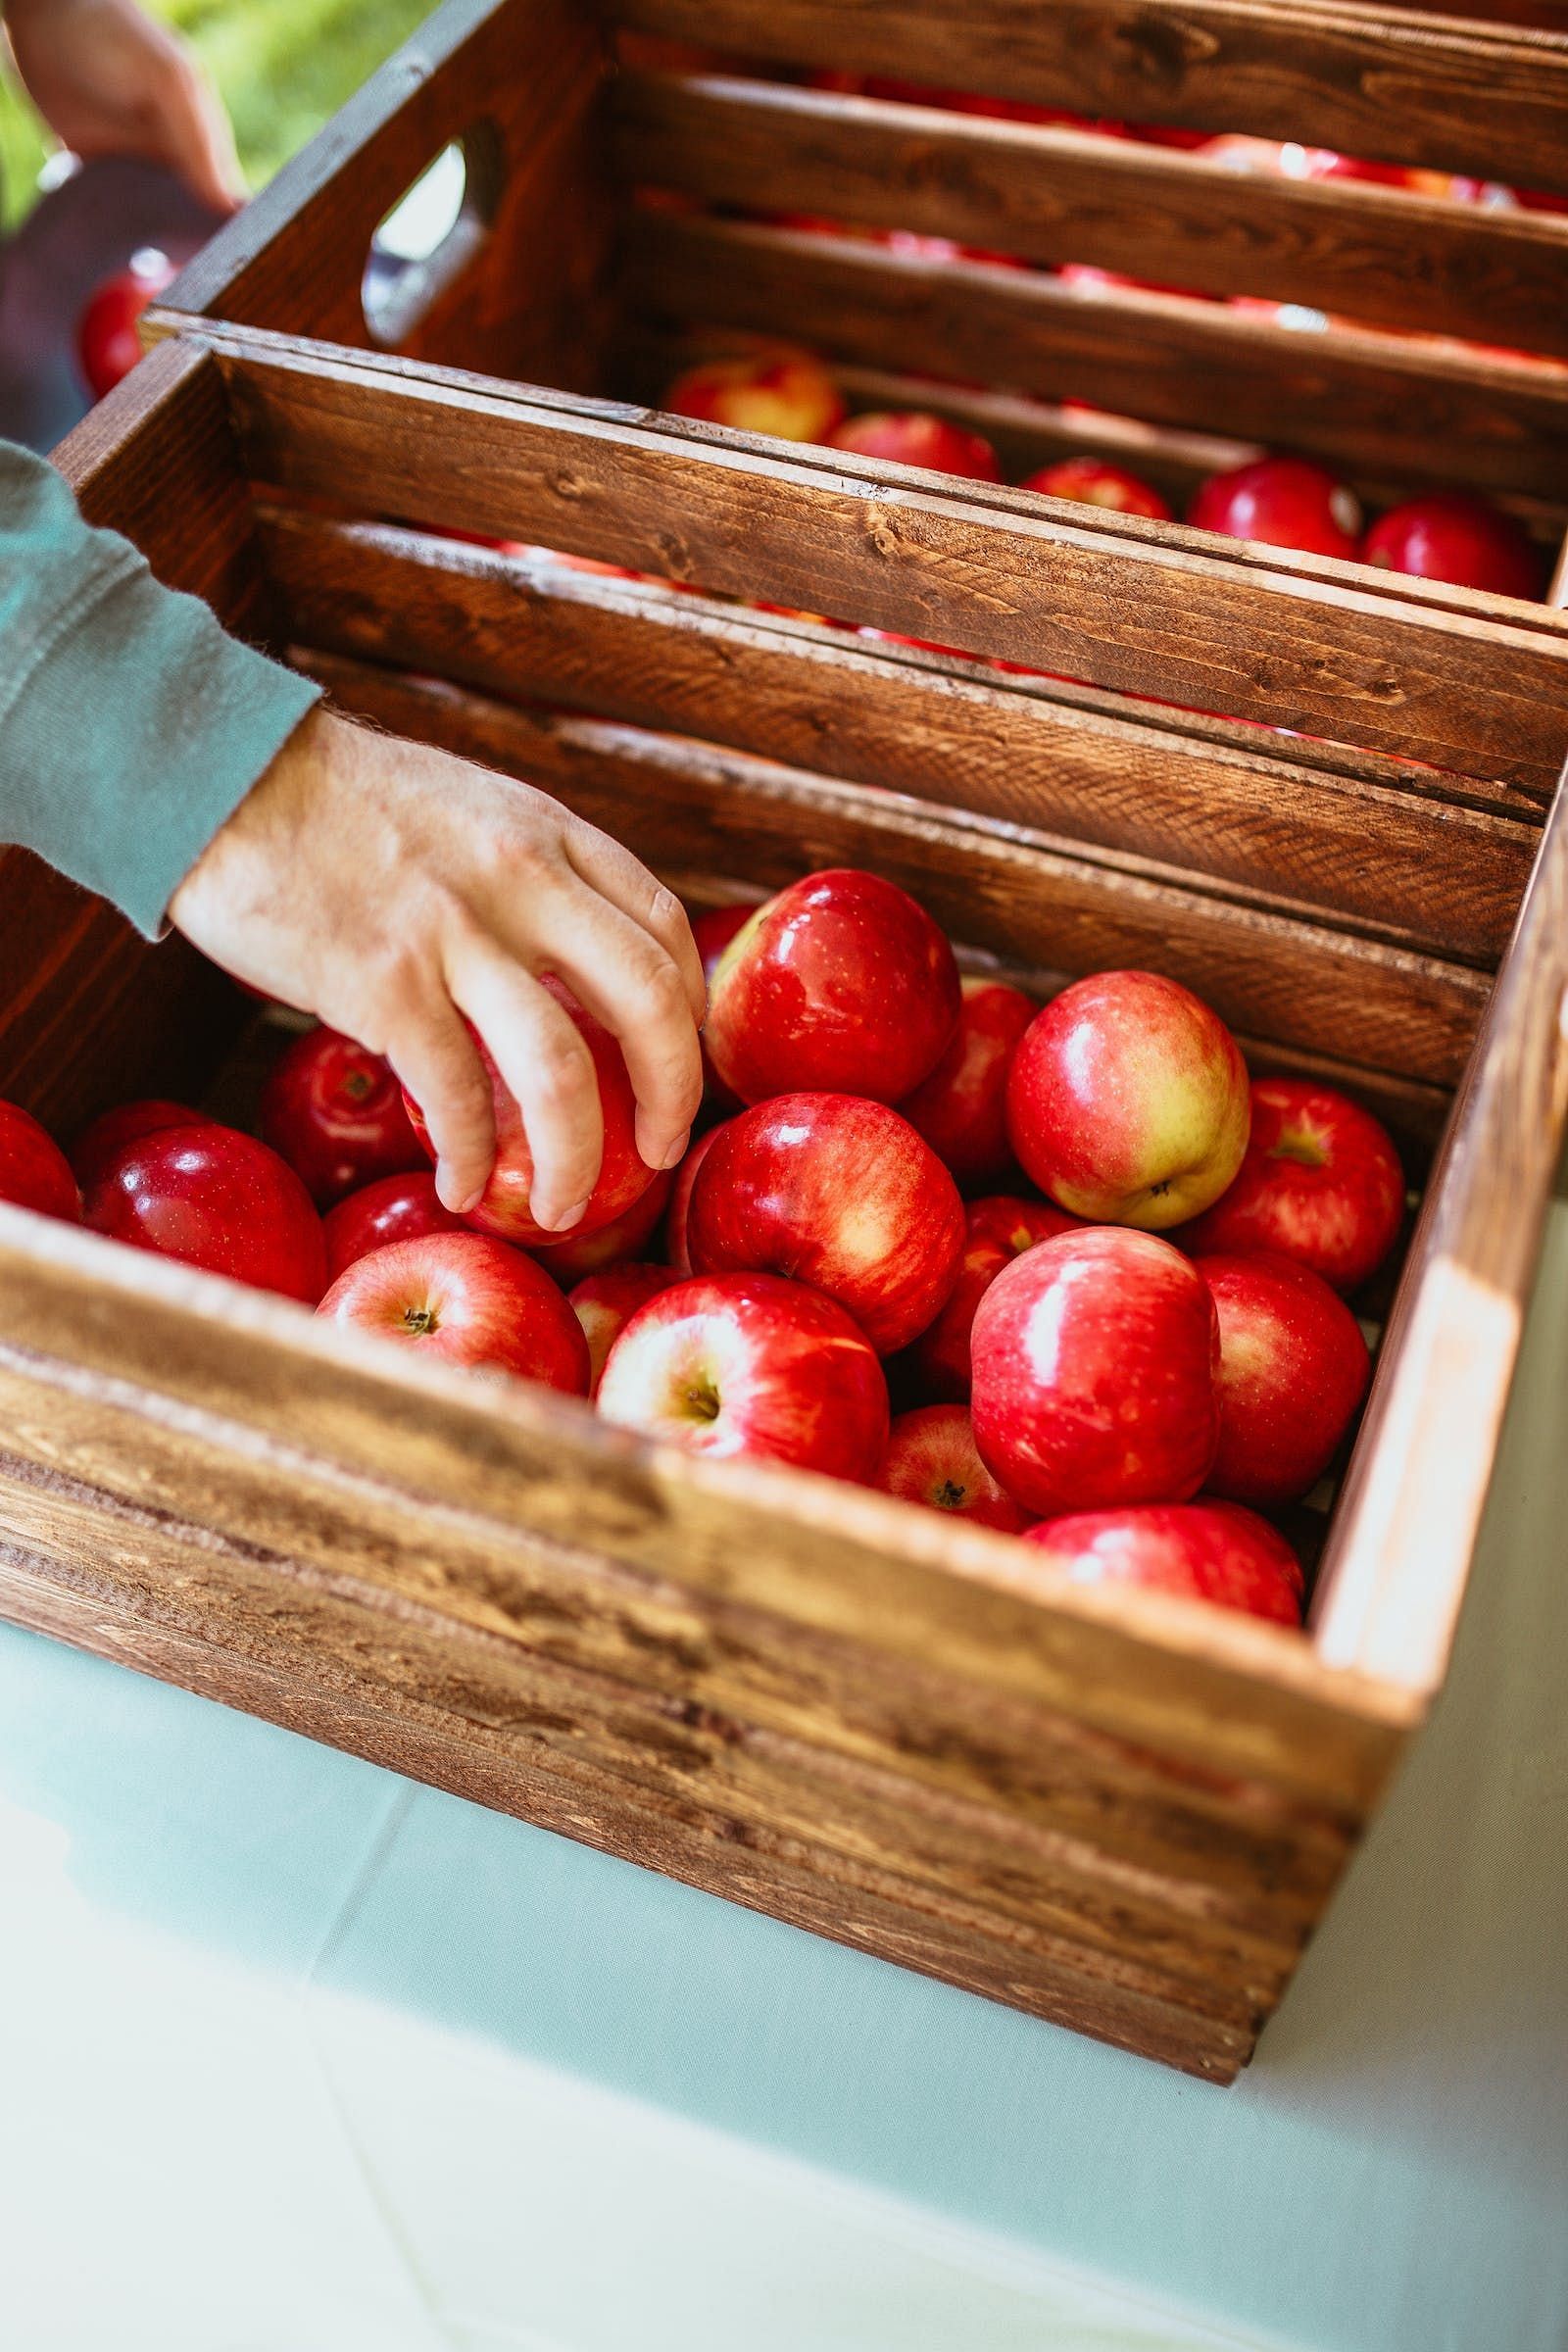 fresh and healthy apple (Image source/ pexels)